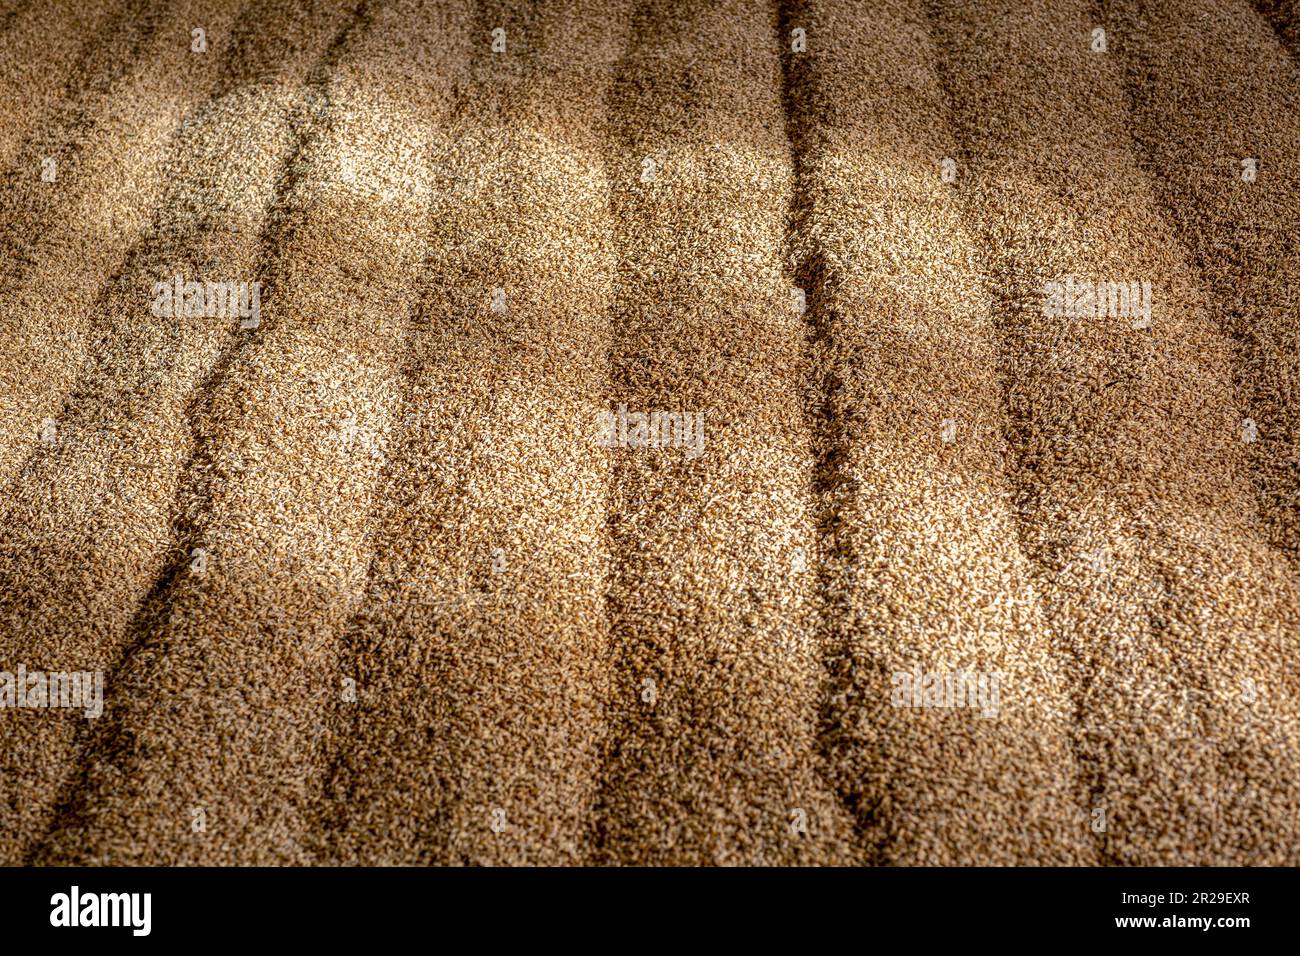 Malting barley with rake lines at Kilchoman  distillery, Isle of Islay, Scotland. Here the barley is drying and germinating. Stock Photo